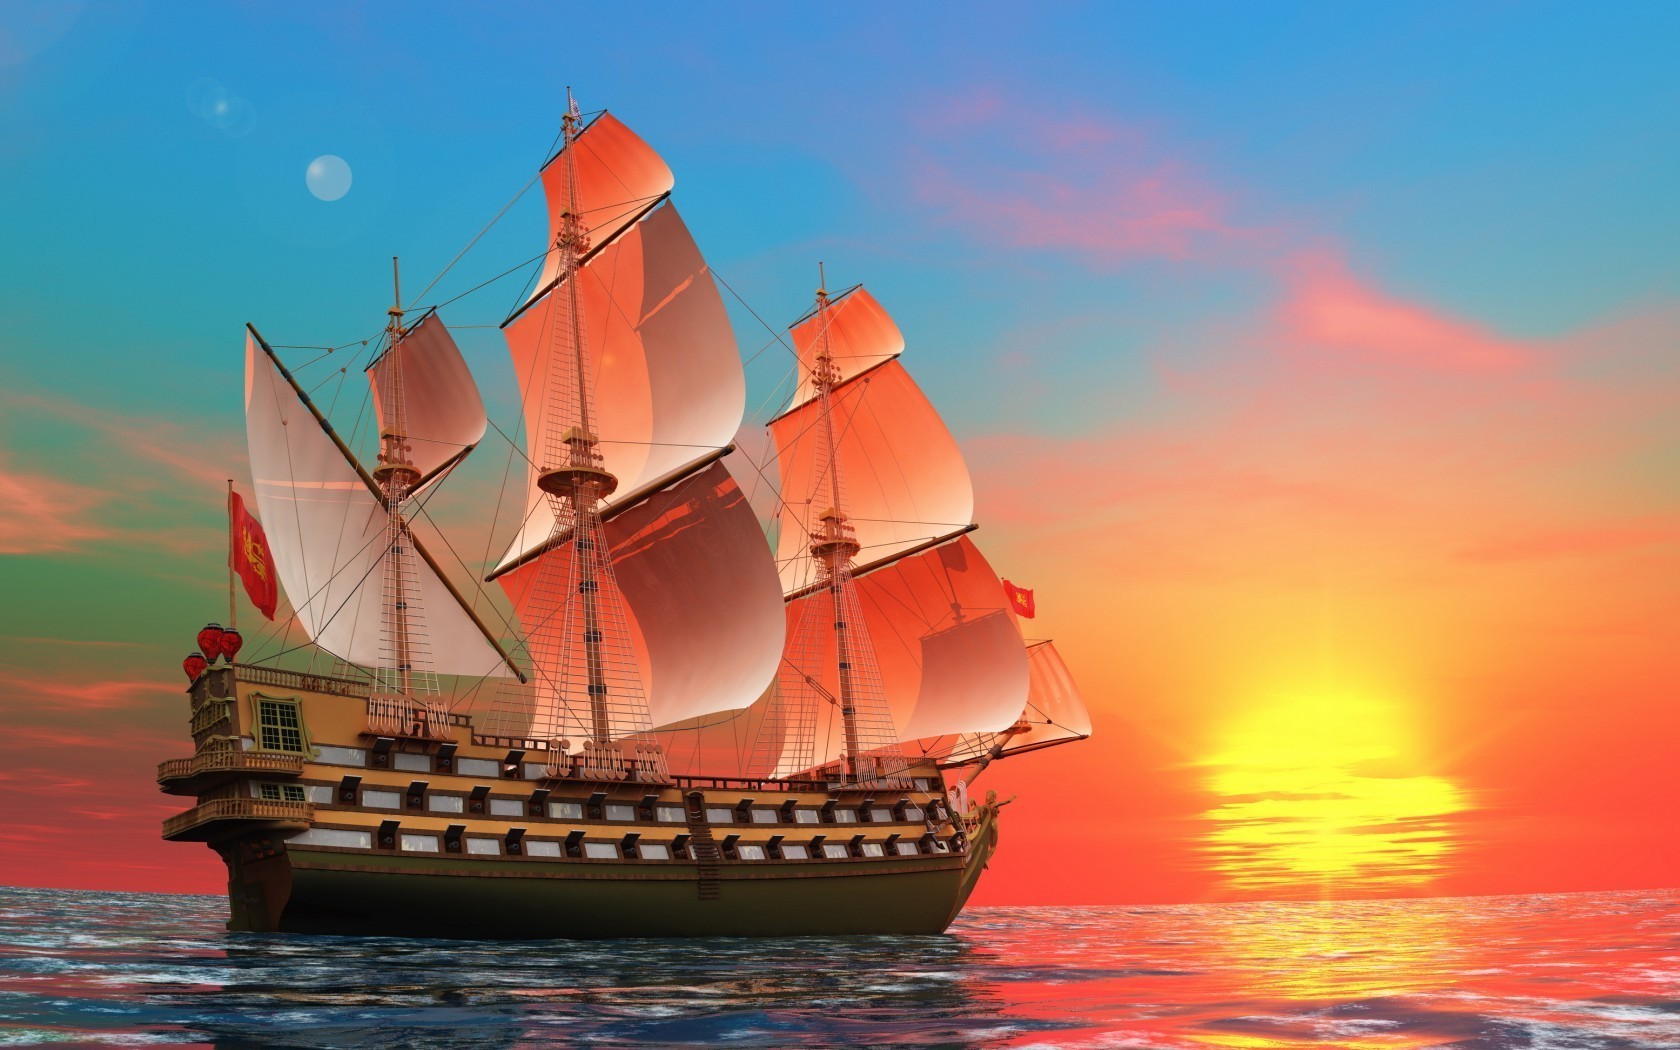 the sunset and sunrise water sea watercraft travel ocean sky sailboat boat ship sail sunset summer tourism